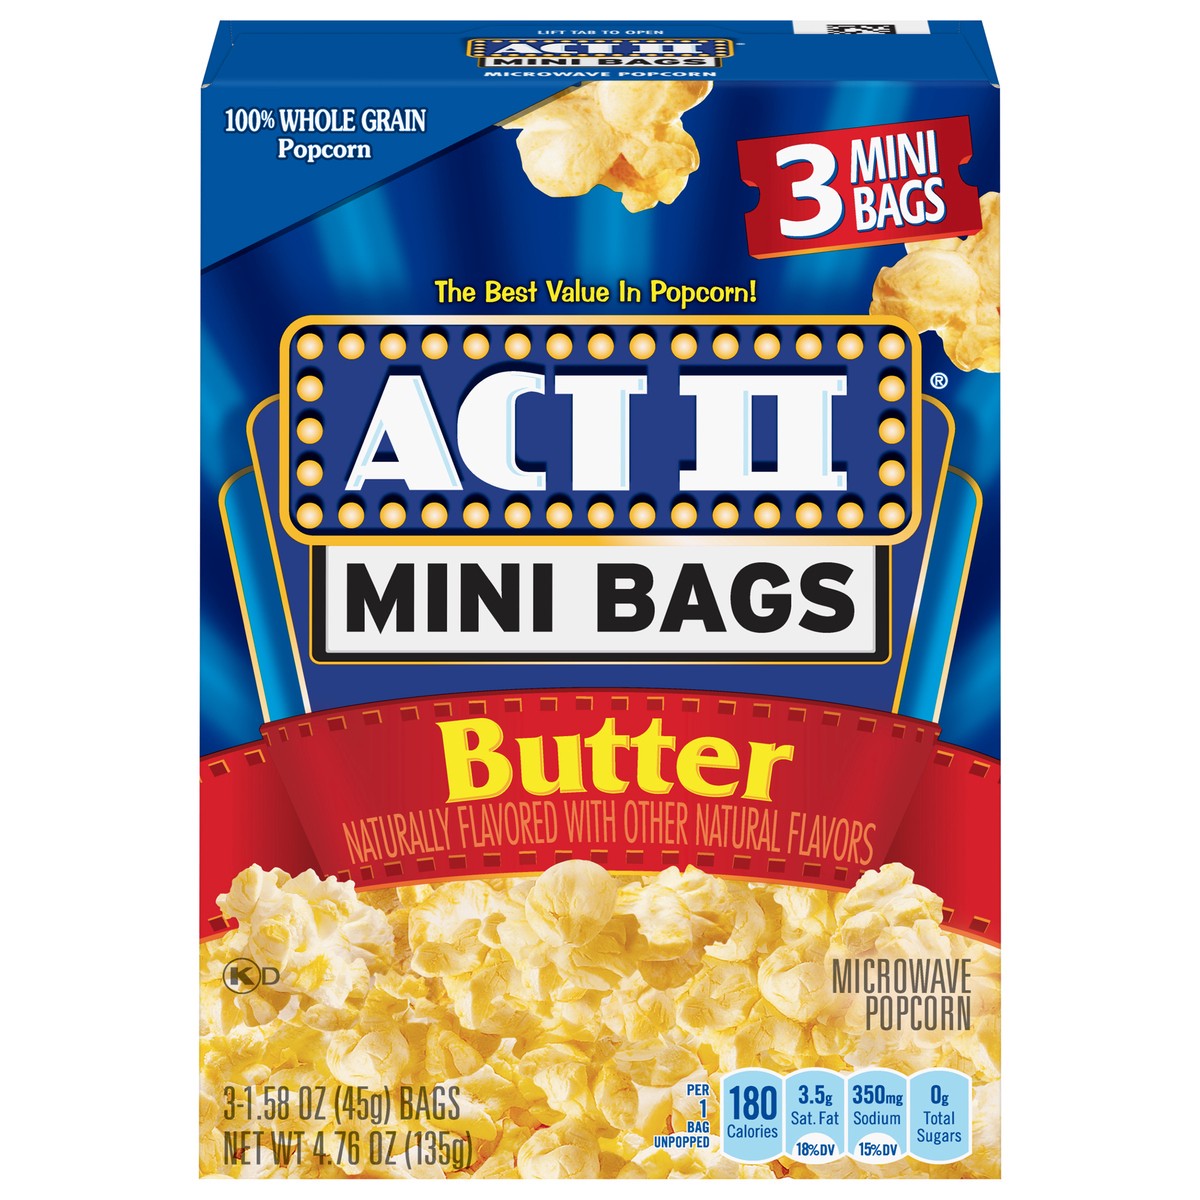 slide 1 of 5, ACT II Mini Bags Butter Microwave Popcorn 3-1.58 oz, 3 ct